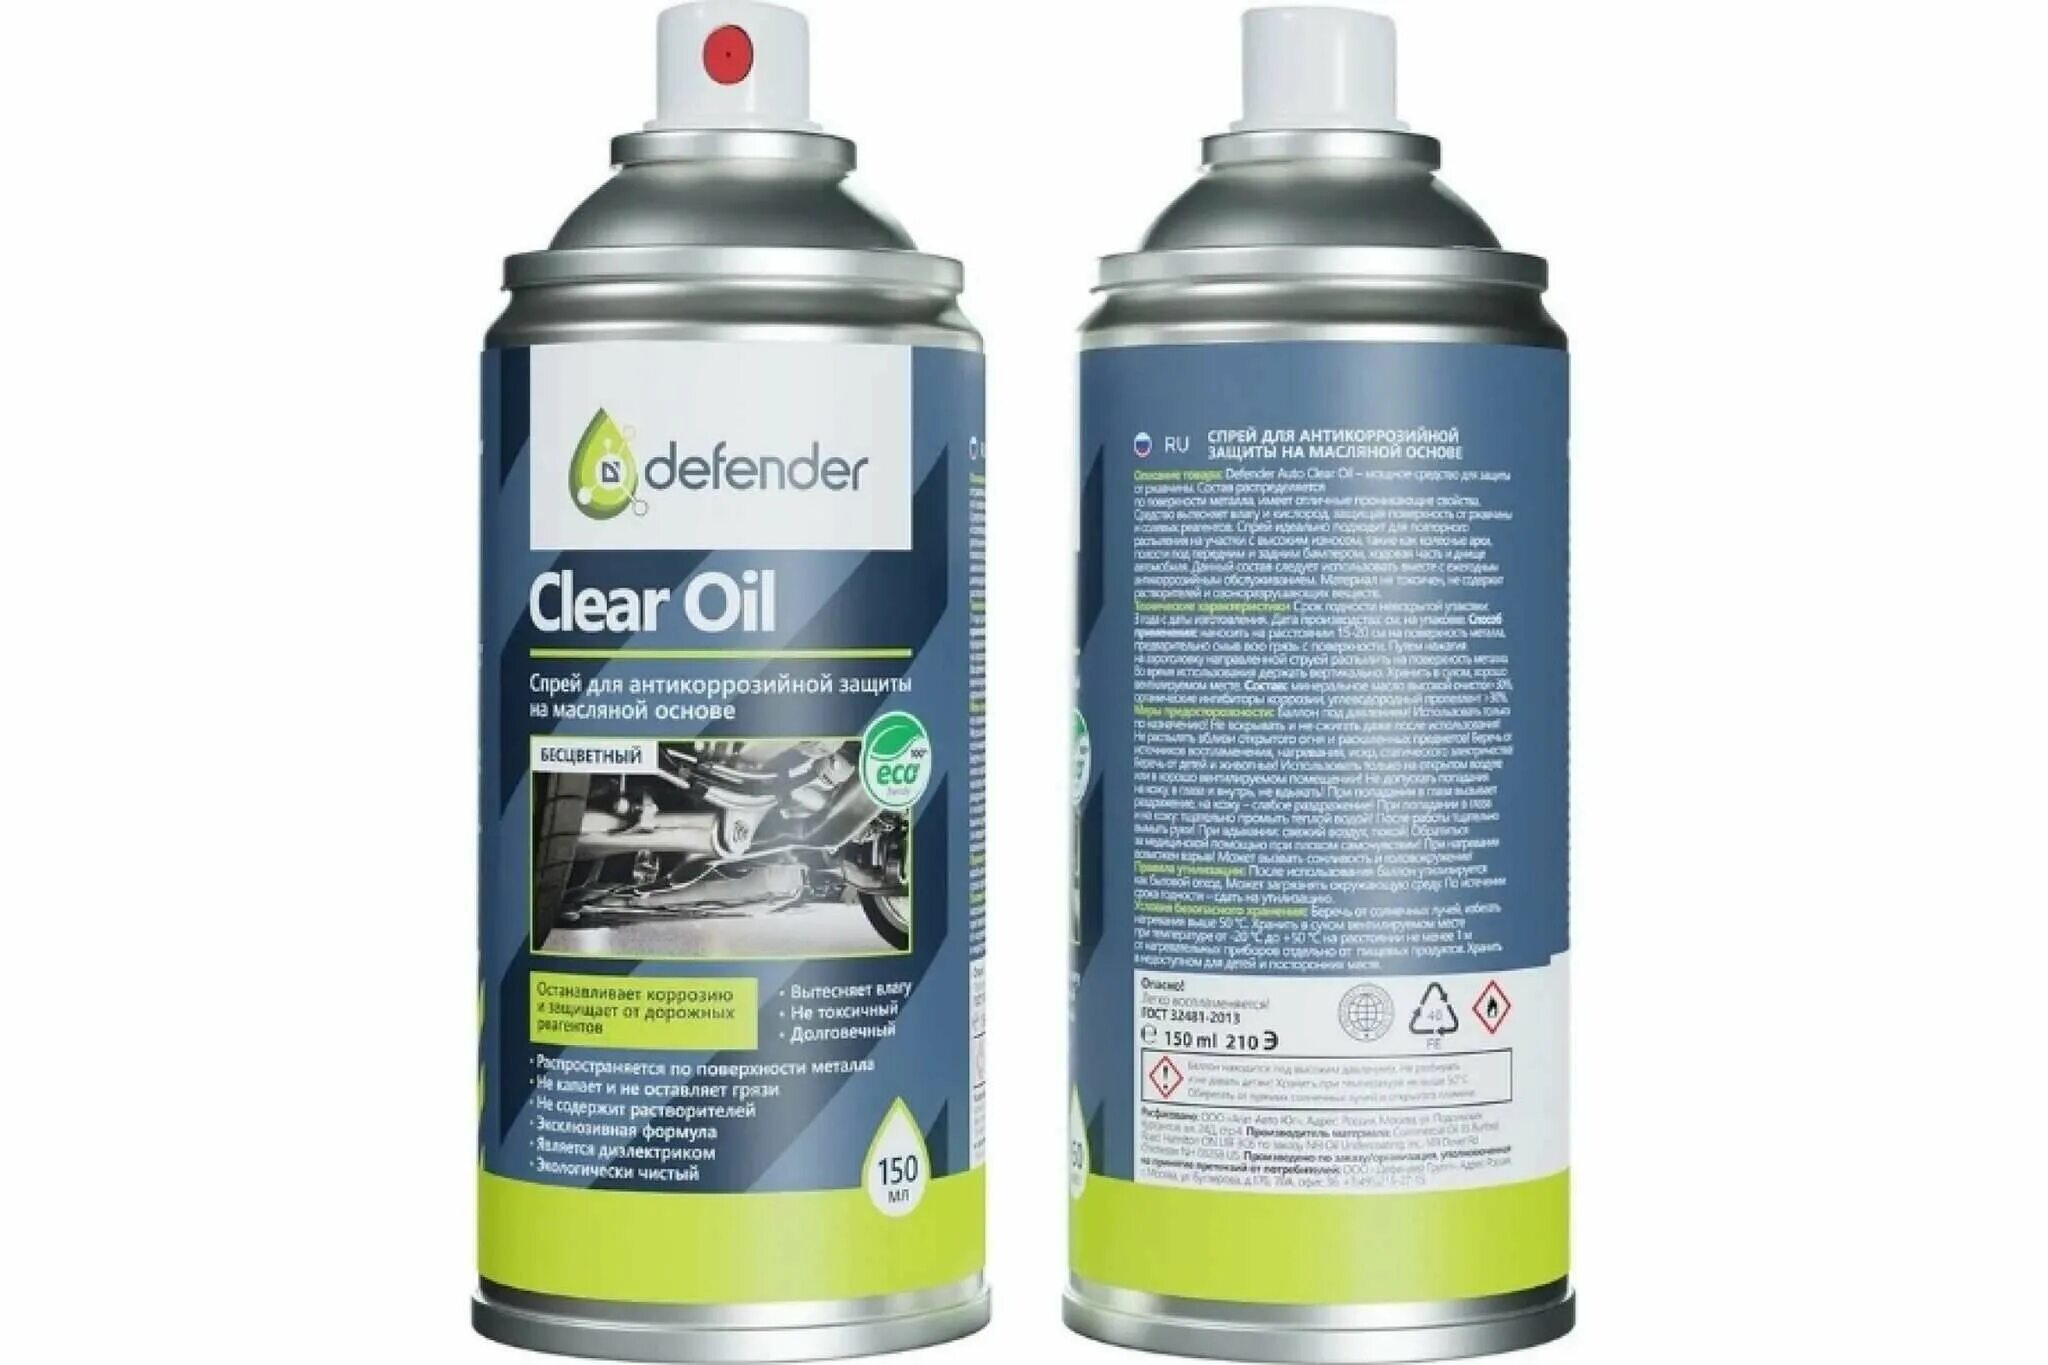 Clear auto. Defender антикор Clear Oil. Антикор Defender auto 150 мл. Антикор "Mannol" Anticor (9909) (1 л). Defender Clear Oil 150 мл.